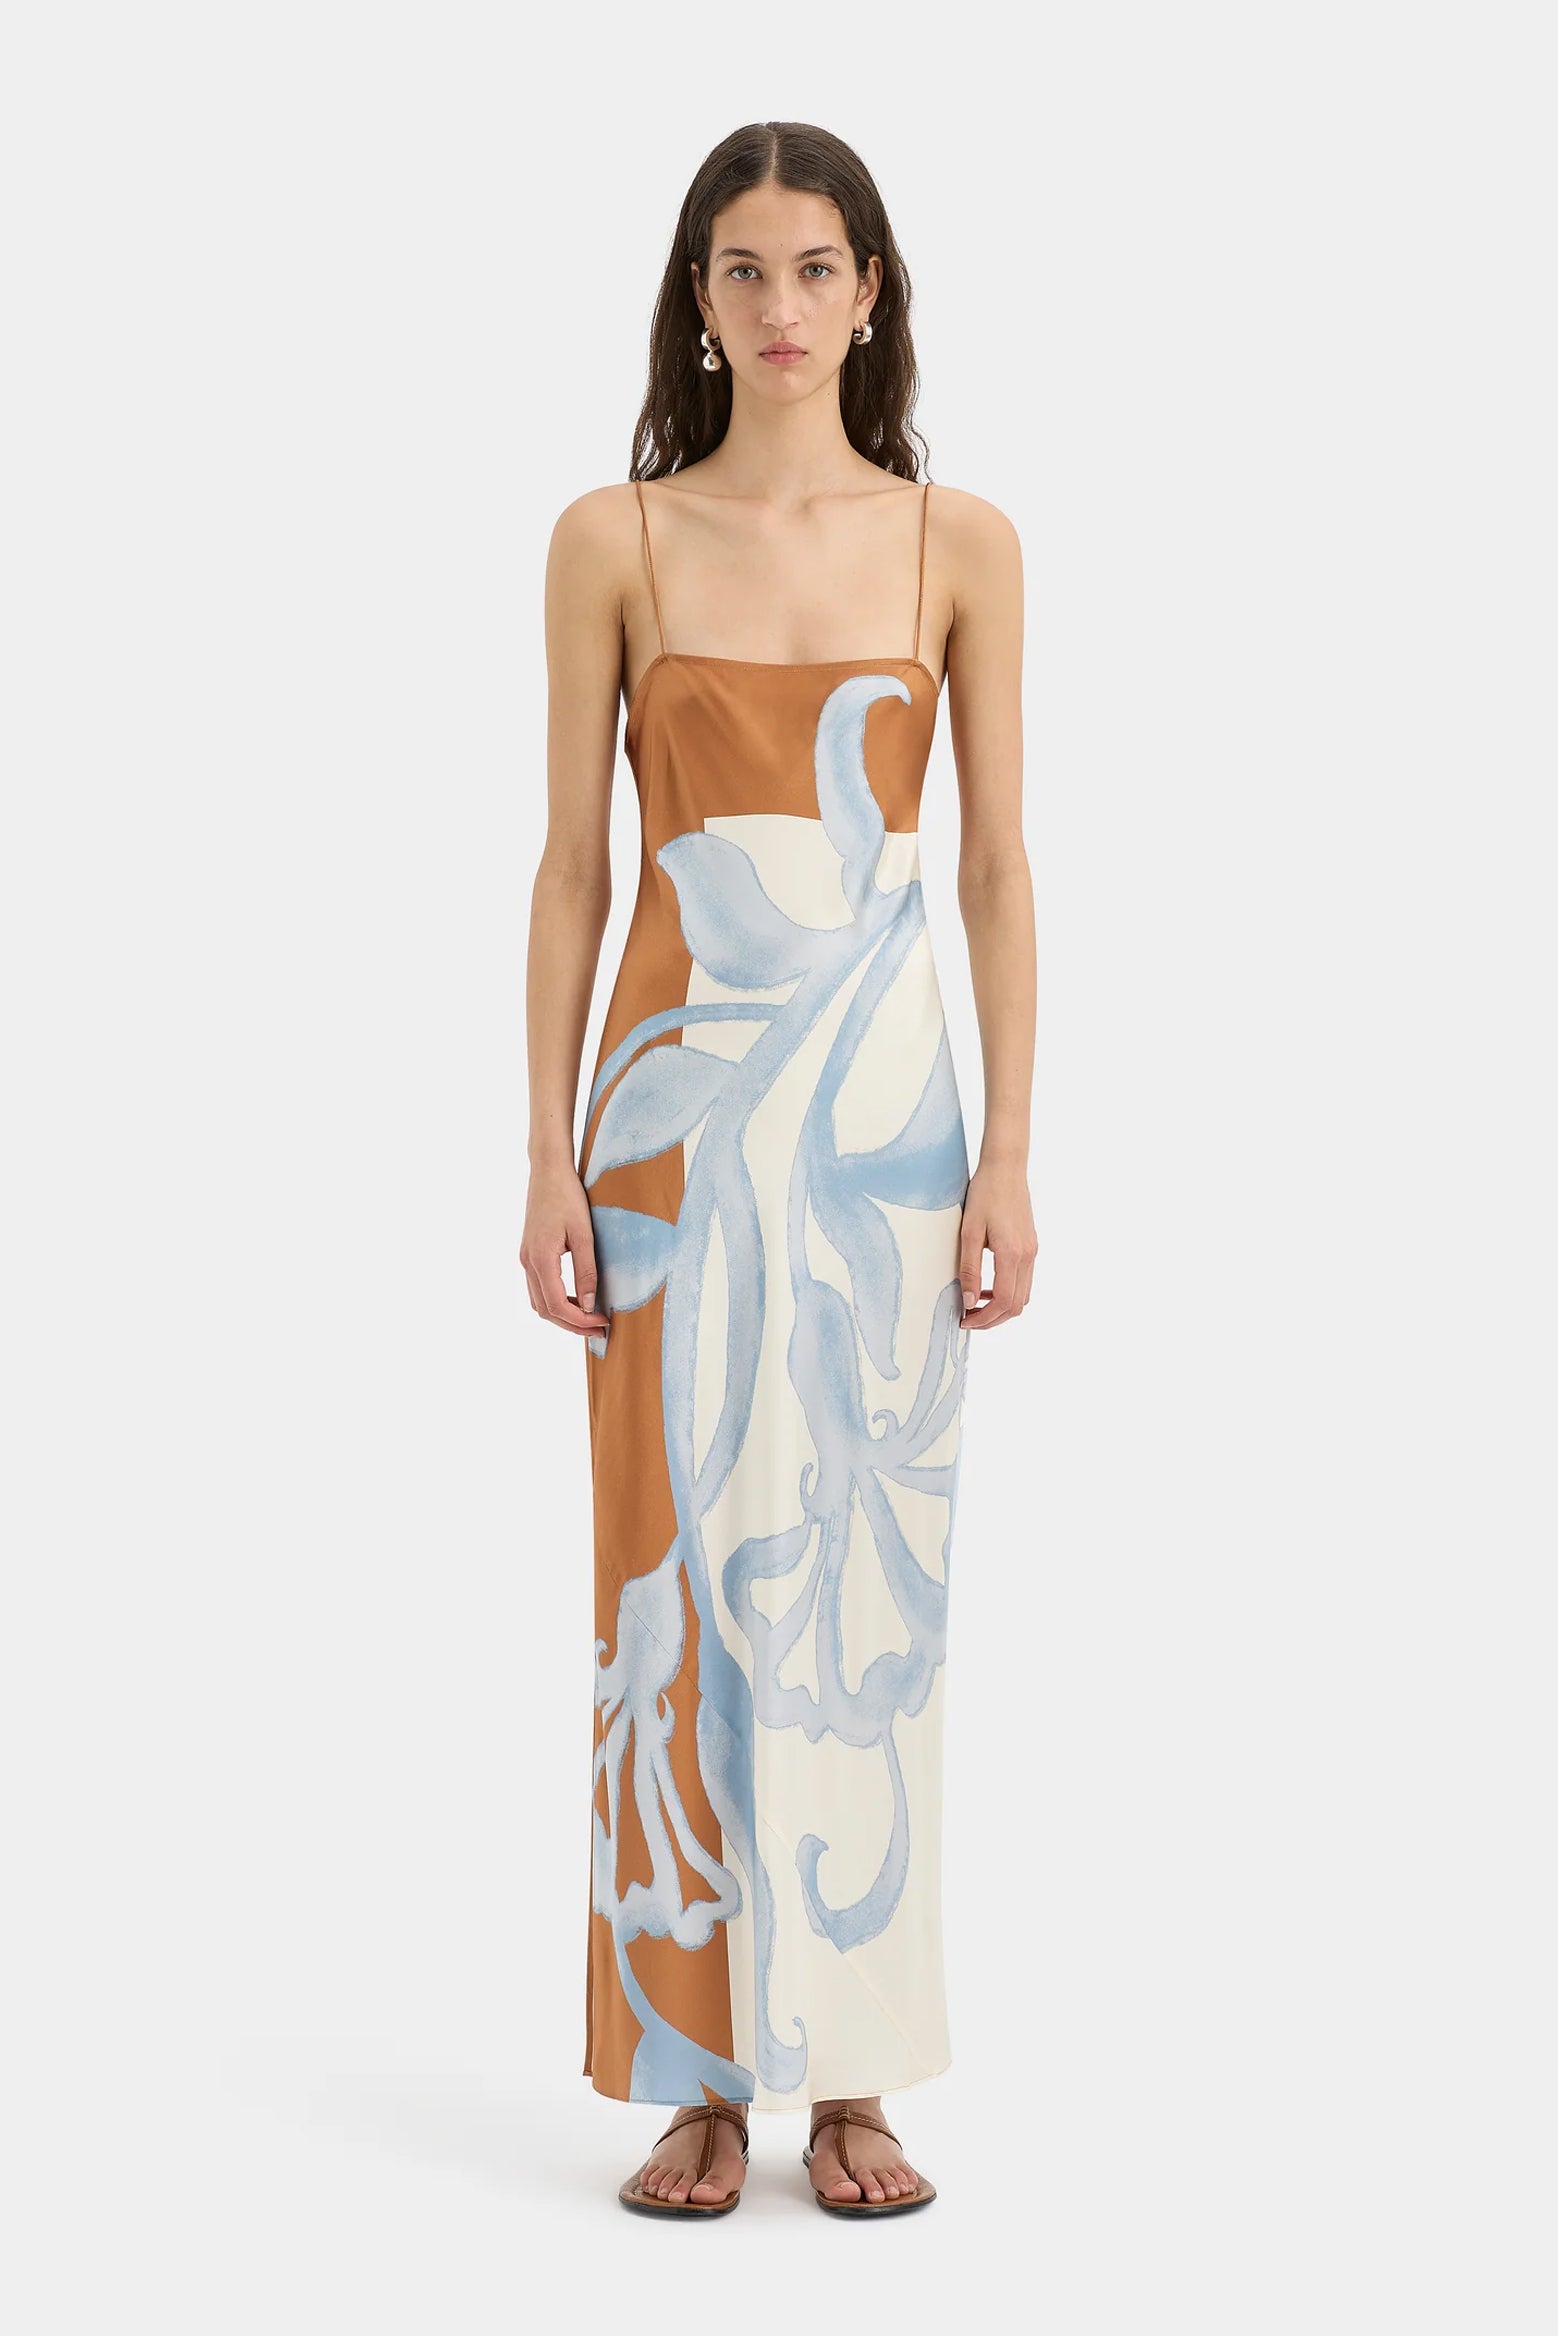 SIR Sorrento Slip Dress in Sciarpa Print available at The New Trend Australia.